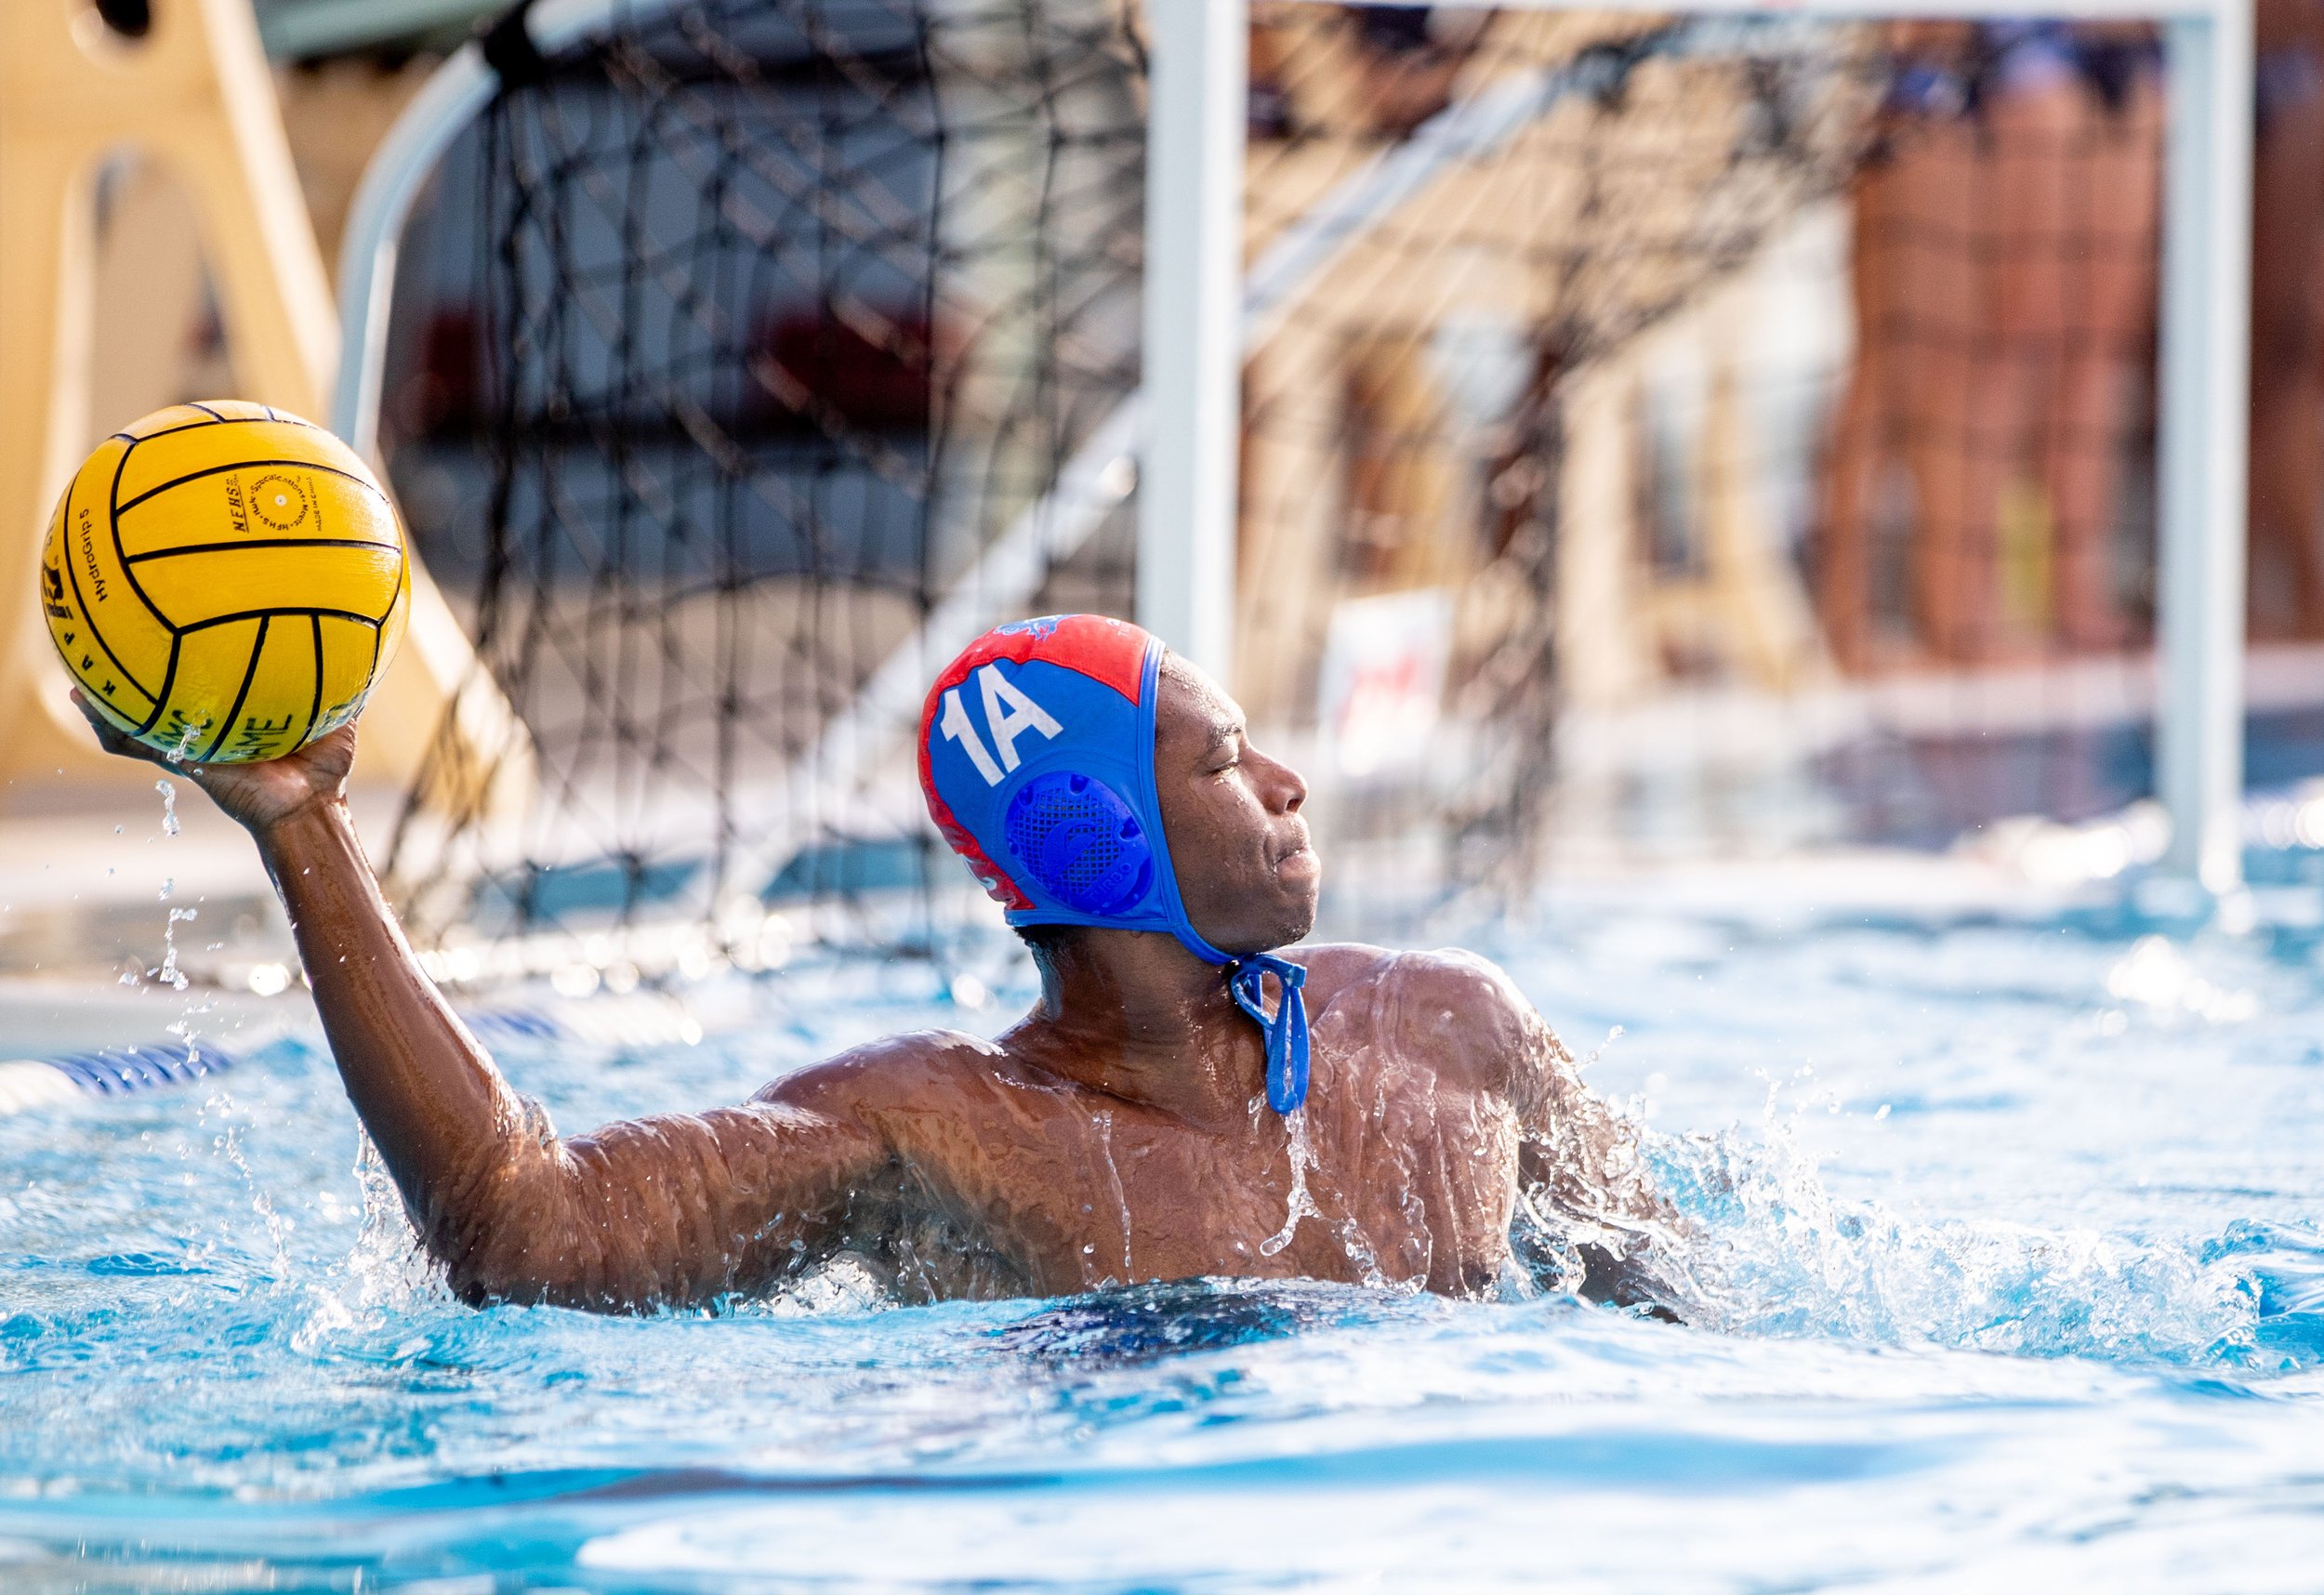  Santa Monica College goalie Nolan McBride (1A) defends the goal during a waterpolo game against San Diego Mesa in Santa Monica, Calif., on Friday, Oct. 21, 2022. (Ethan Swope | The Corsair)   